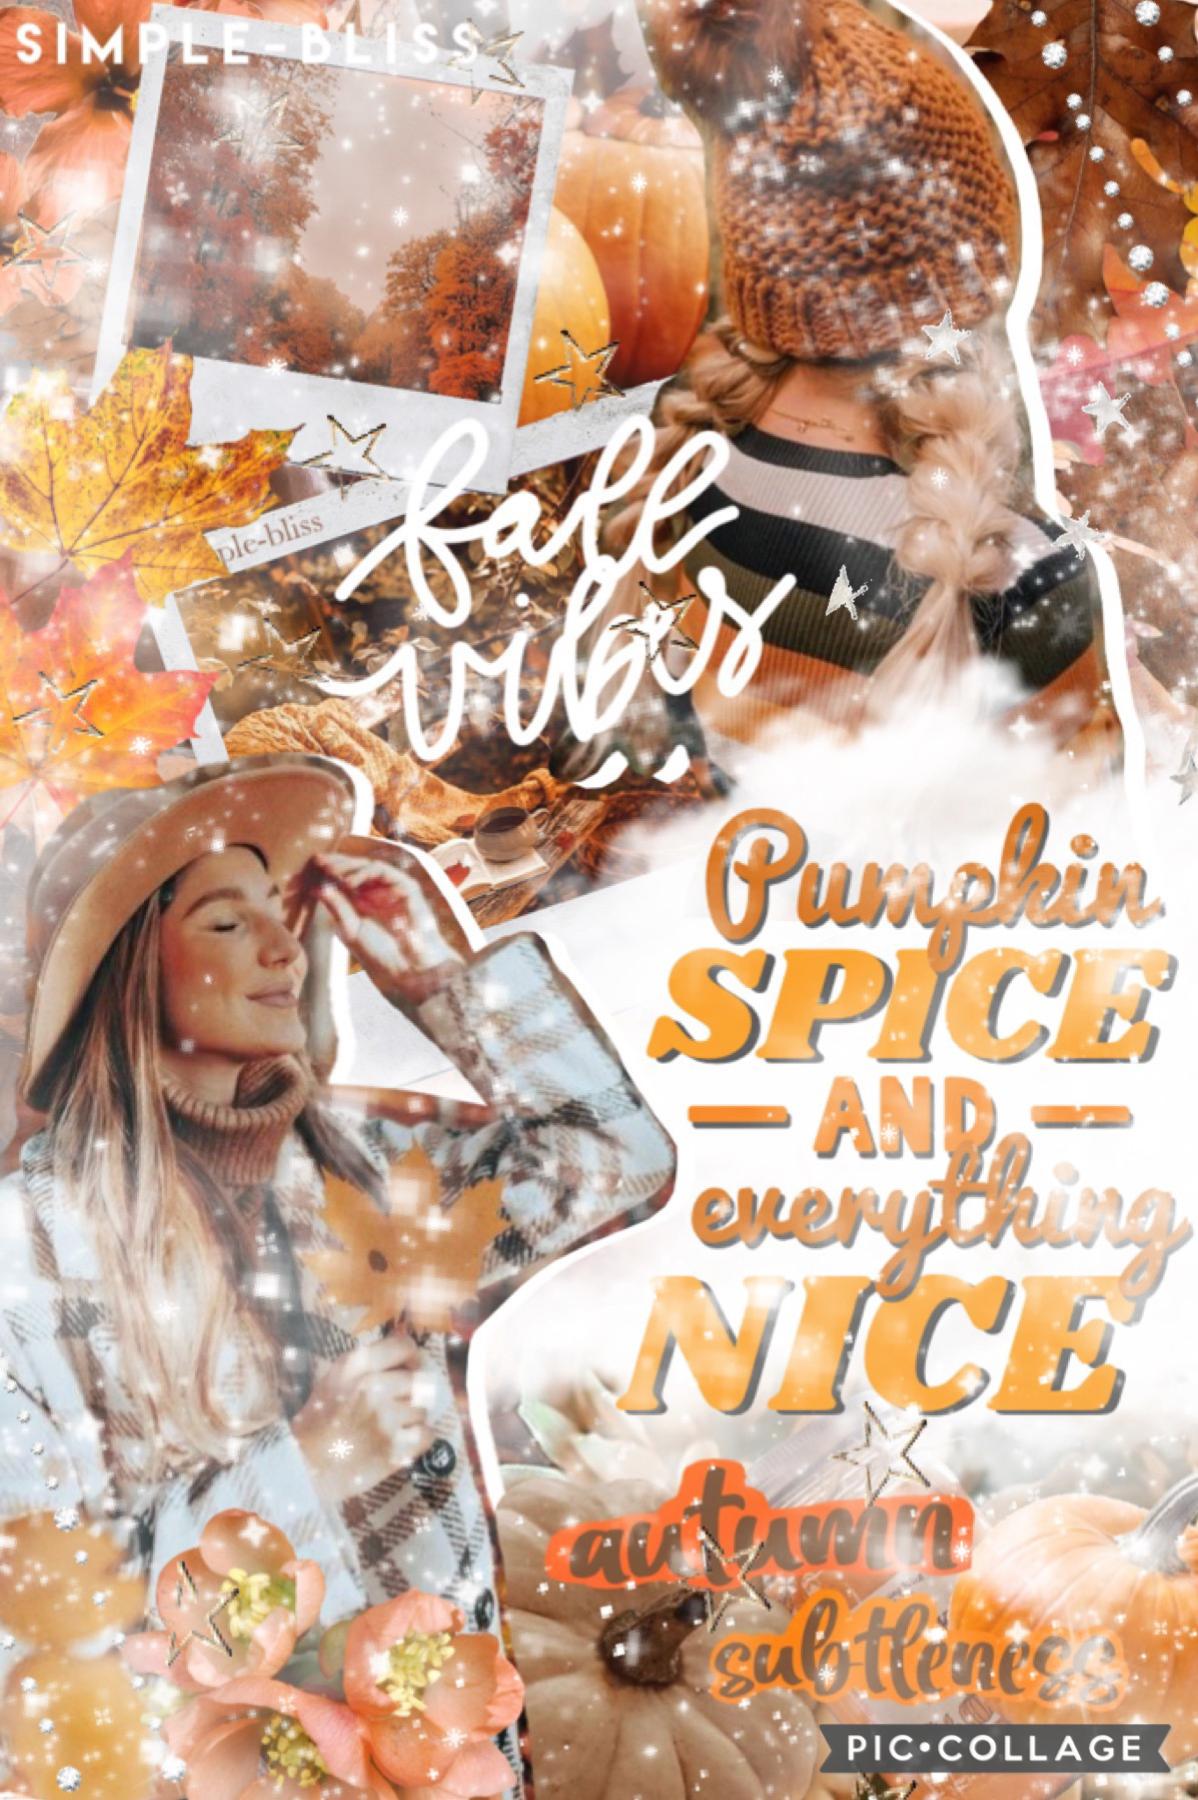 🥧9•26•22🥧 (TAP)
Hello! It’s officially autumn over here! 🍂 
I hope you like this collage.. not sure about the text tho 😅 
Make sure to follow my spam acc: @laura_spams!
QOTD: Pumpkin spice, yay or nay?
AOTD: it’s a nope from me 🤢 